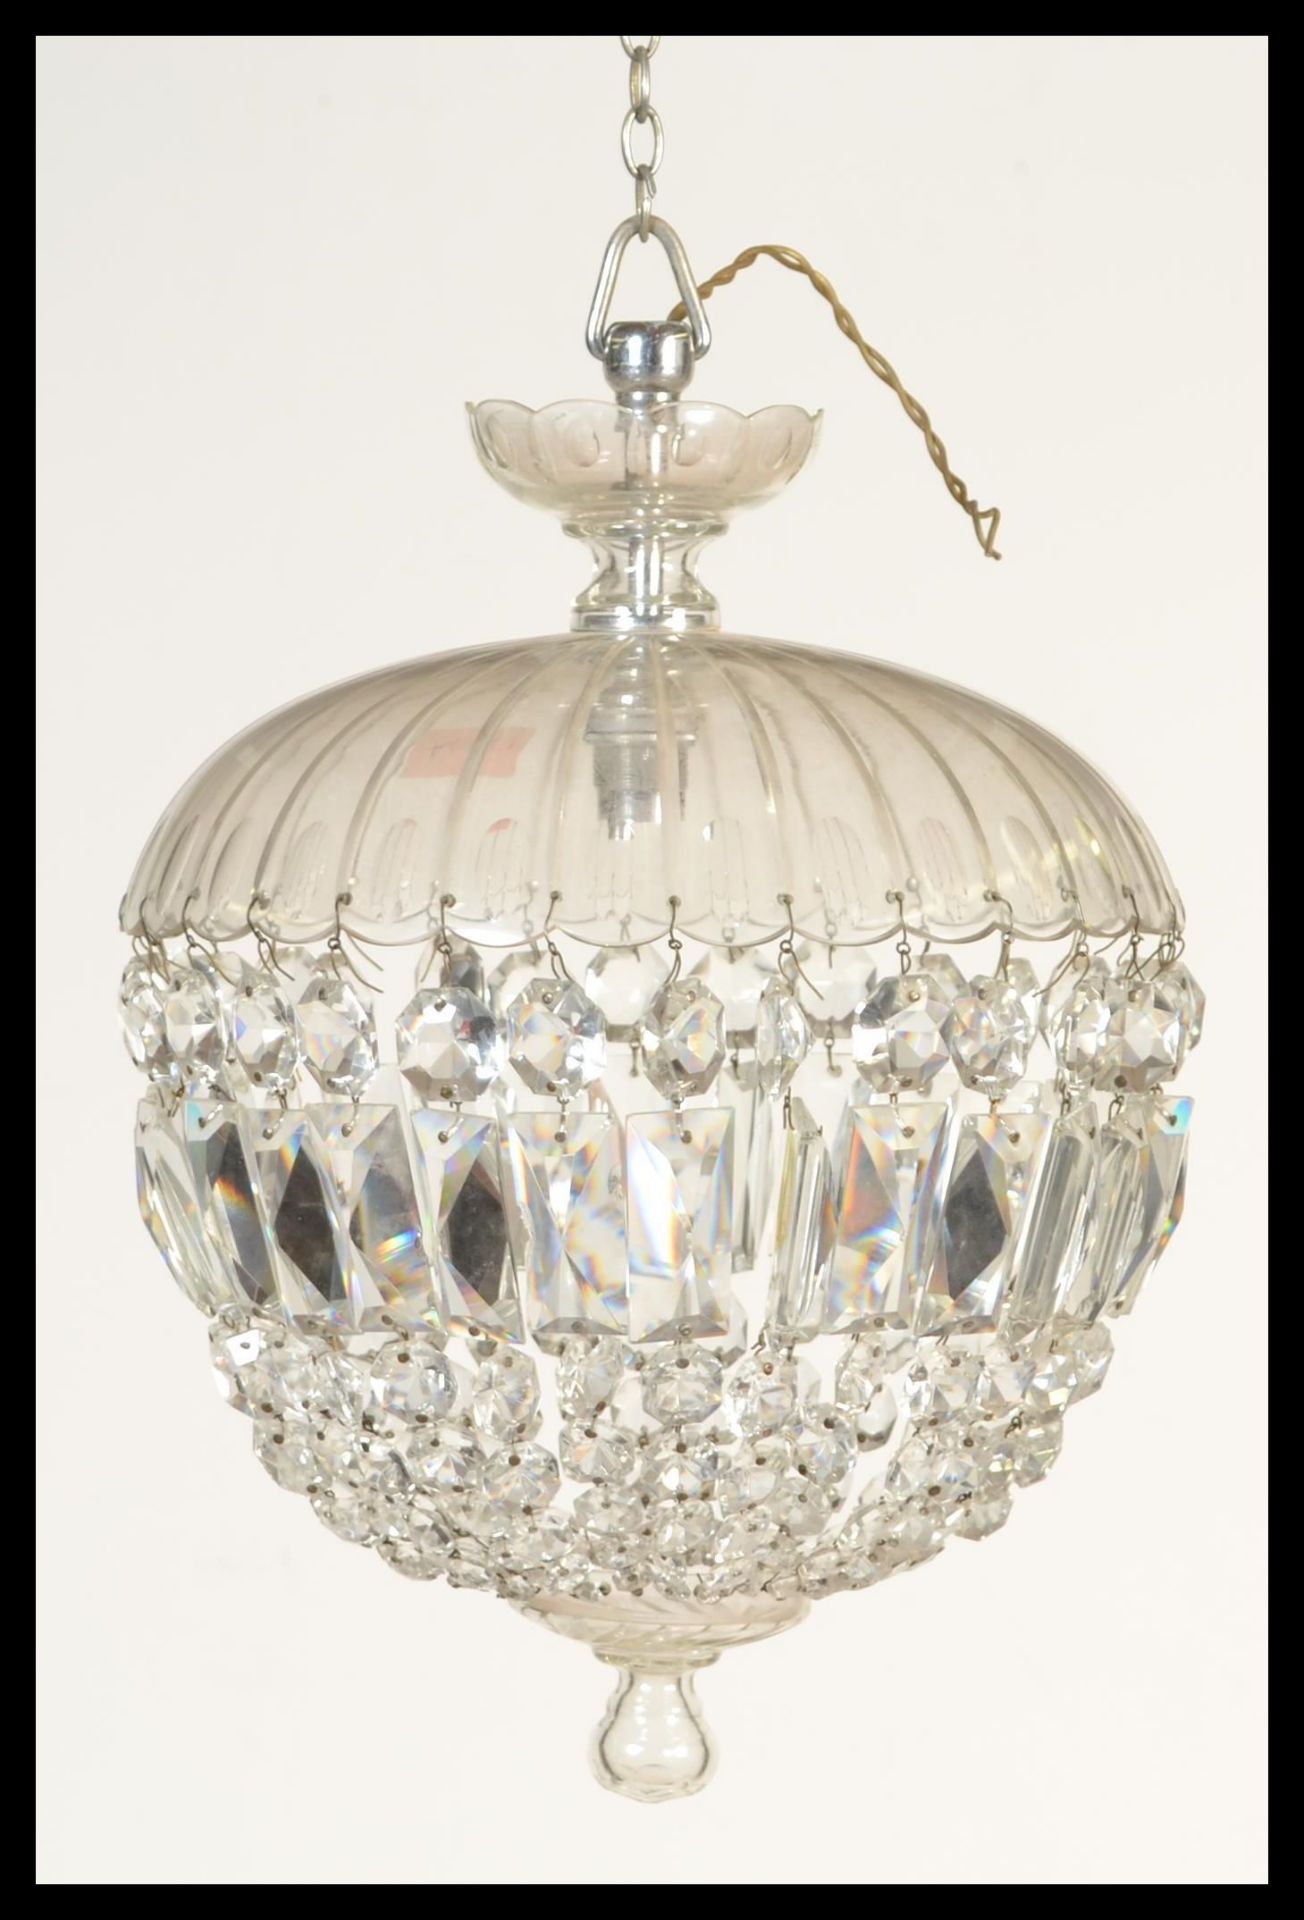 An early 20th Century large glass crystal chandelier hanging light fixture having multiple strands